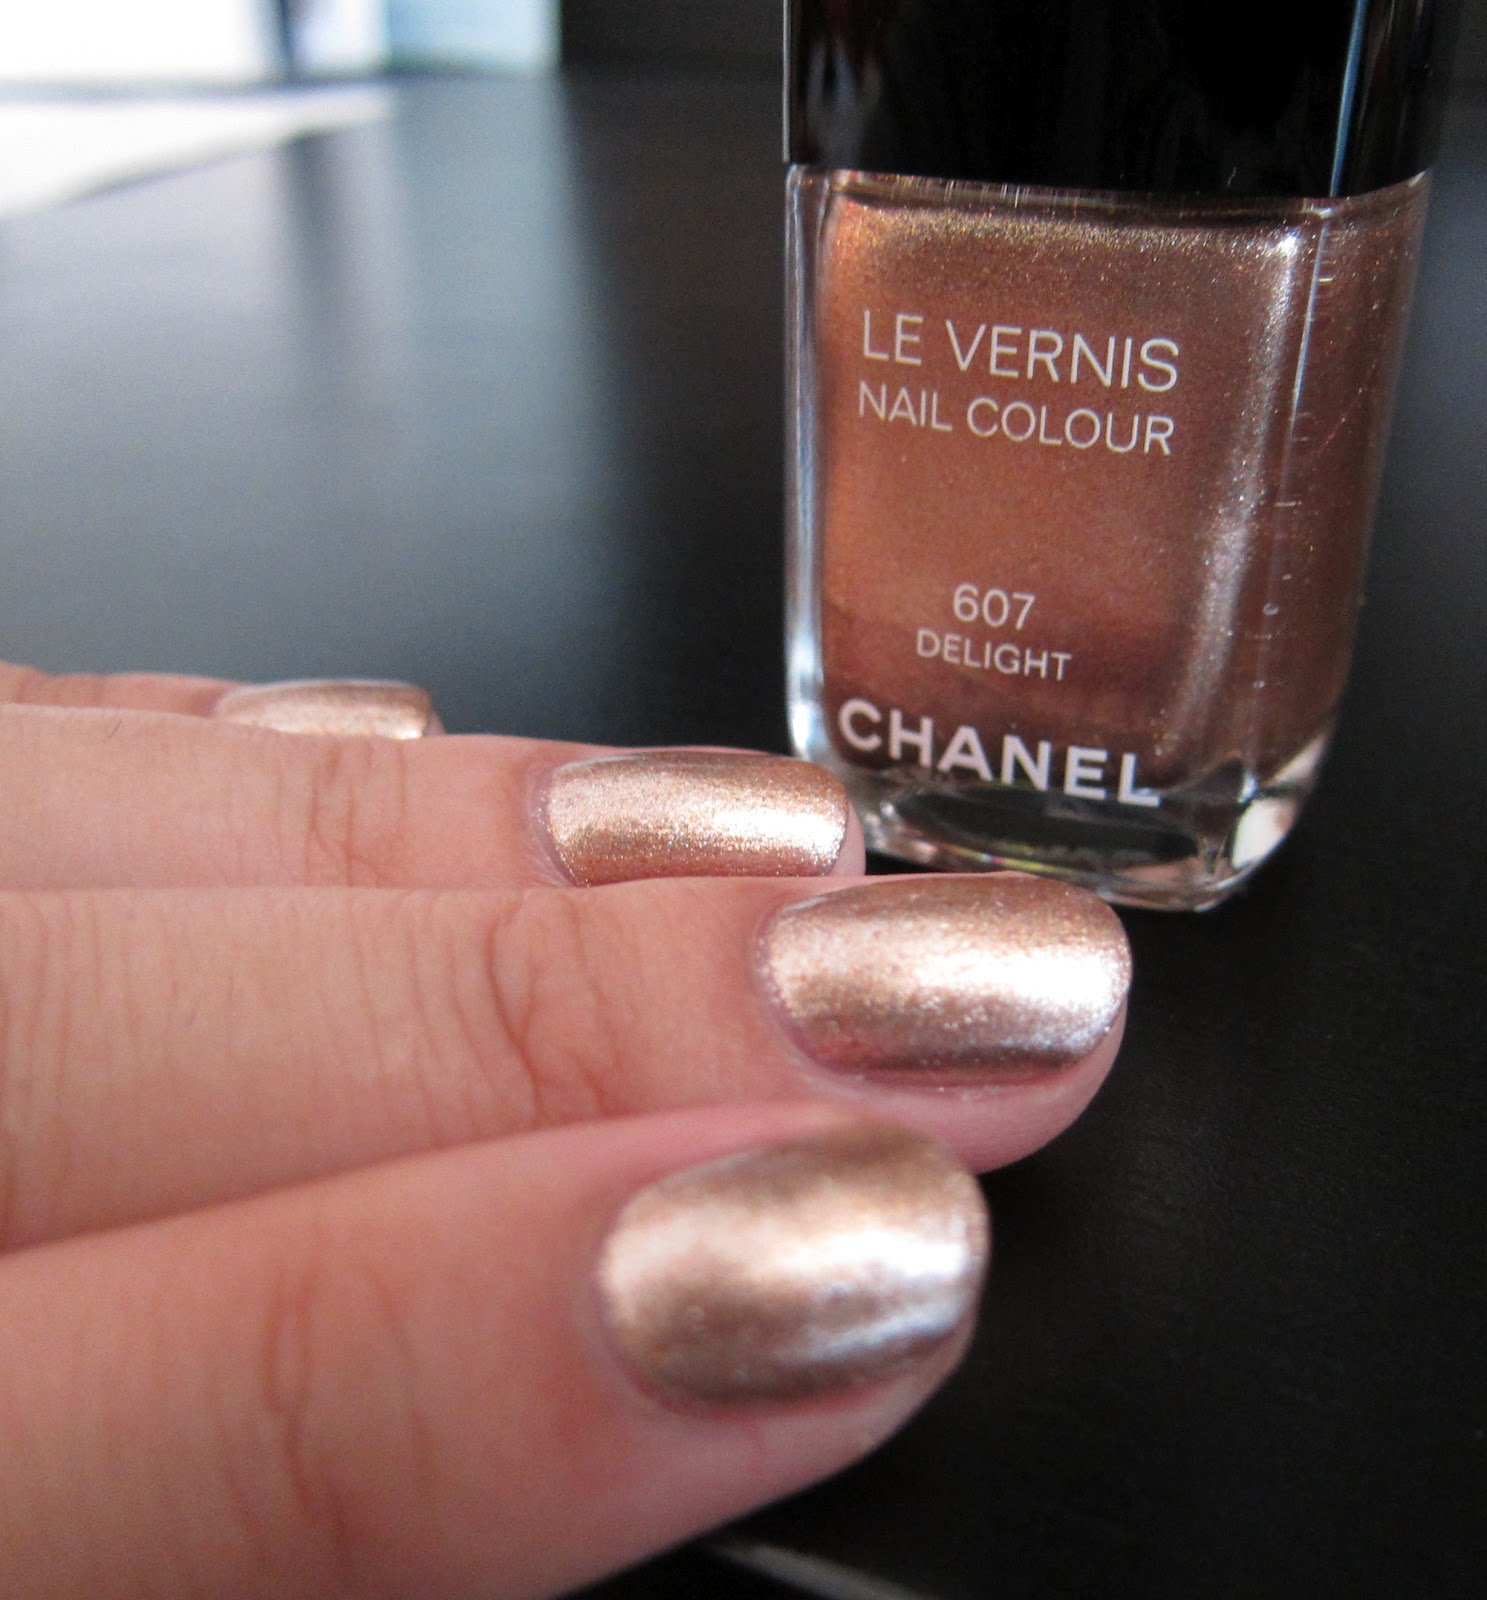 Chanel in #607 Delight